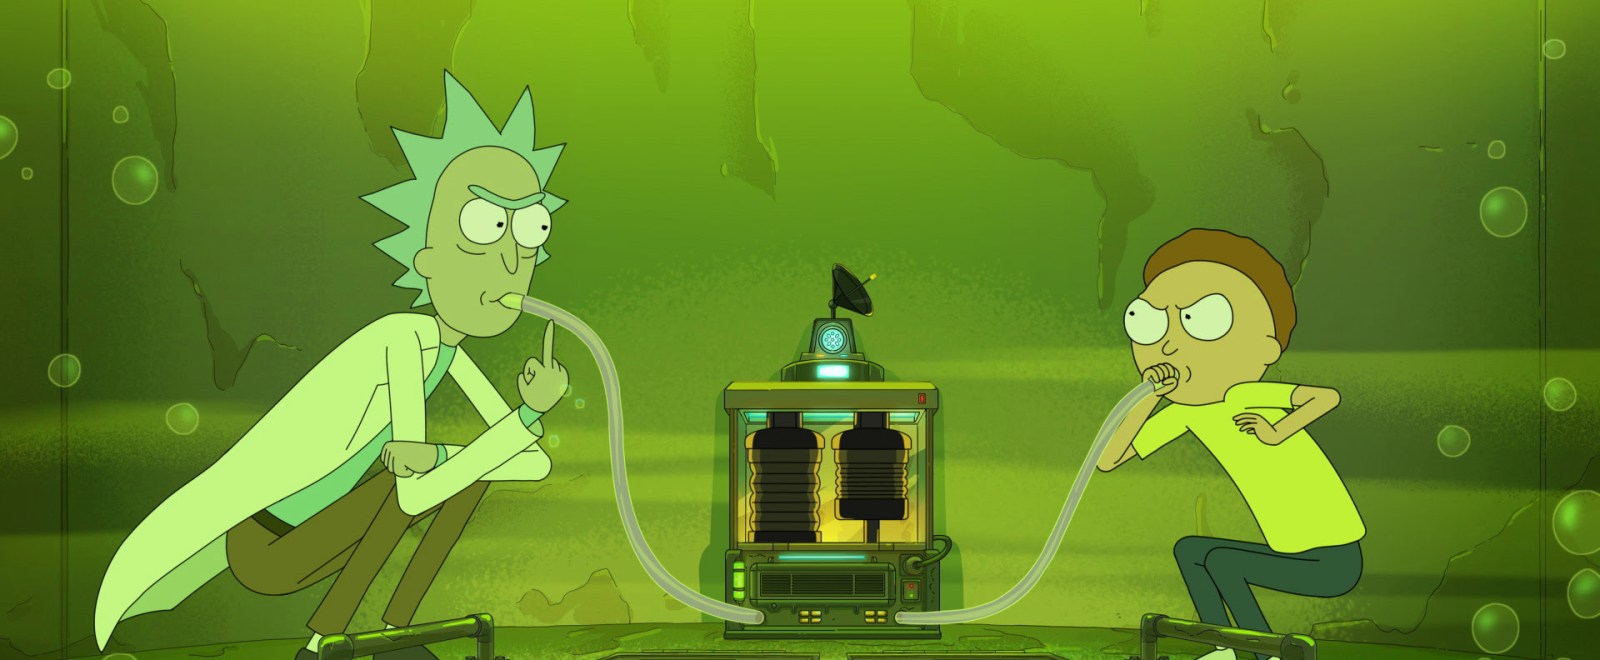 Rick And Morty S Season 5 Guest Stars Include A Community Favorite And Timothy Olyphant - brawl stars mando nimbus